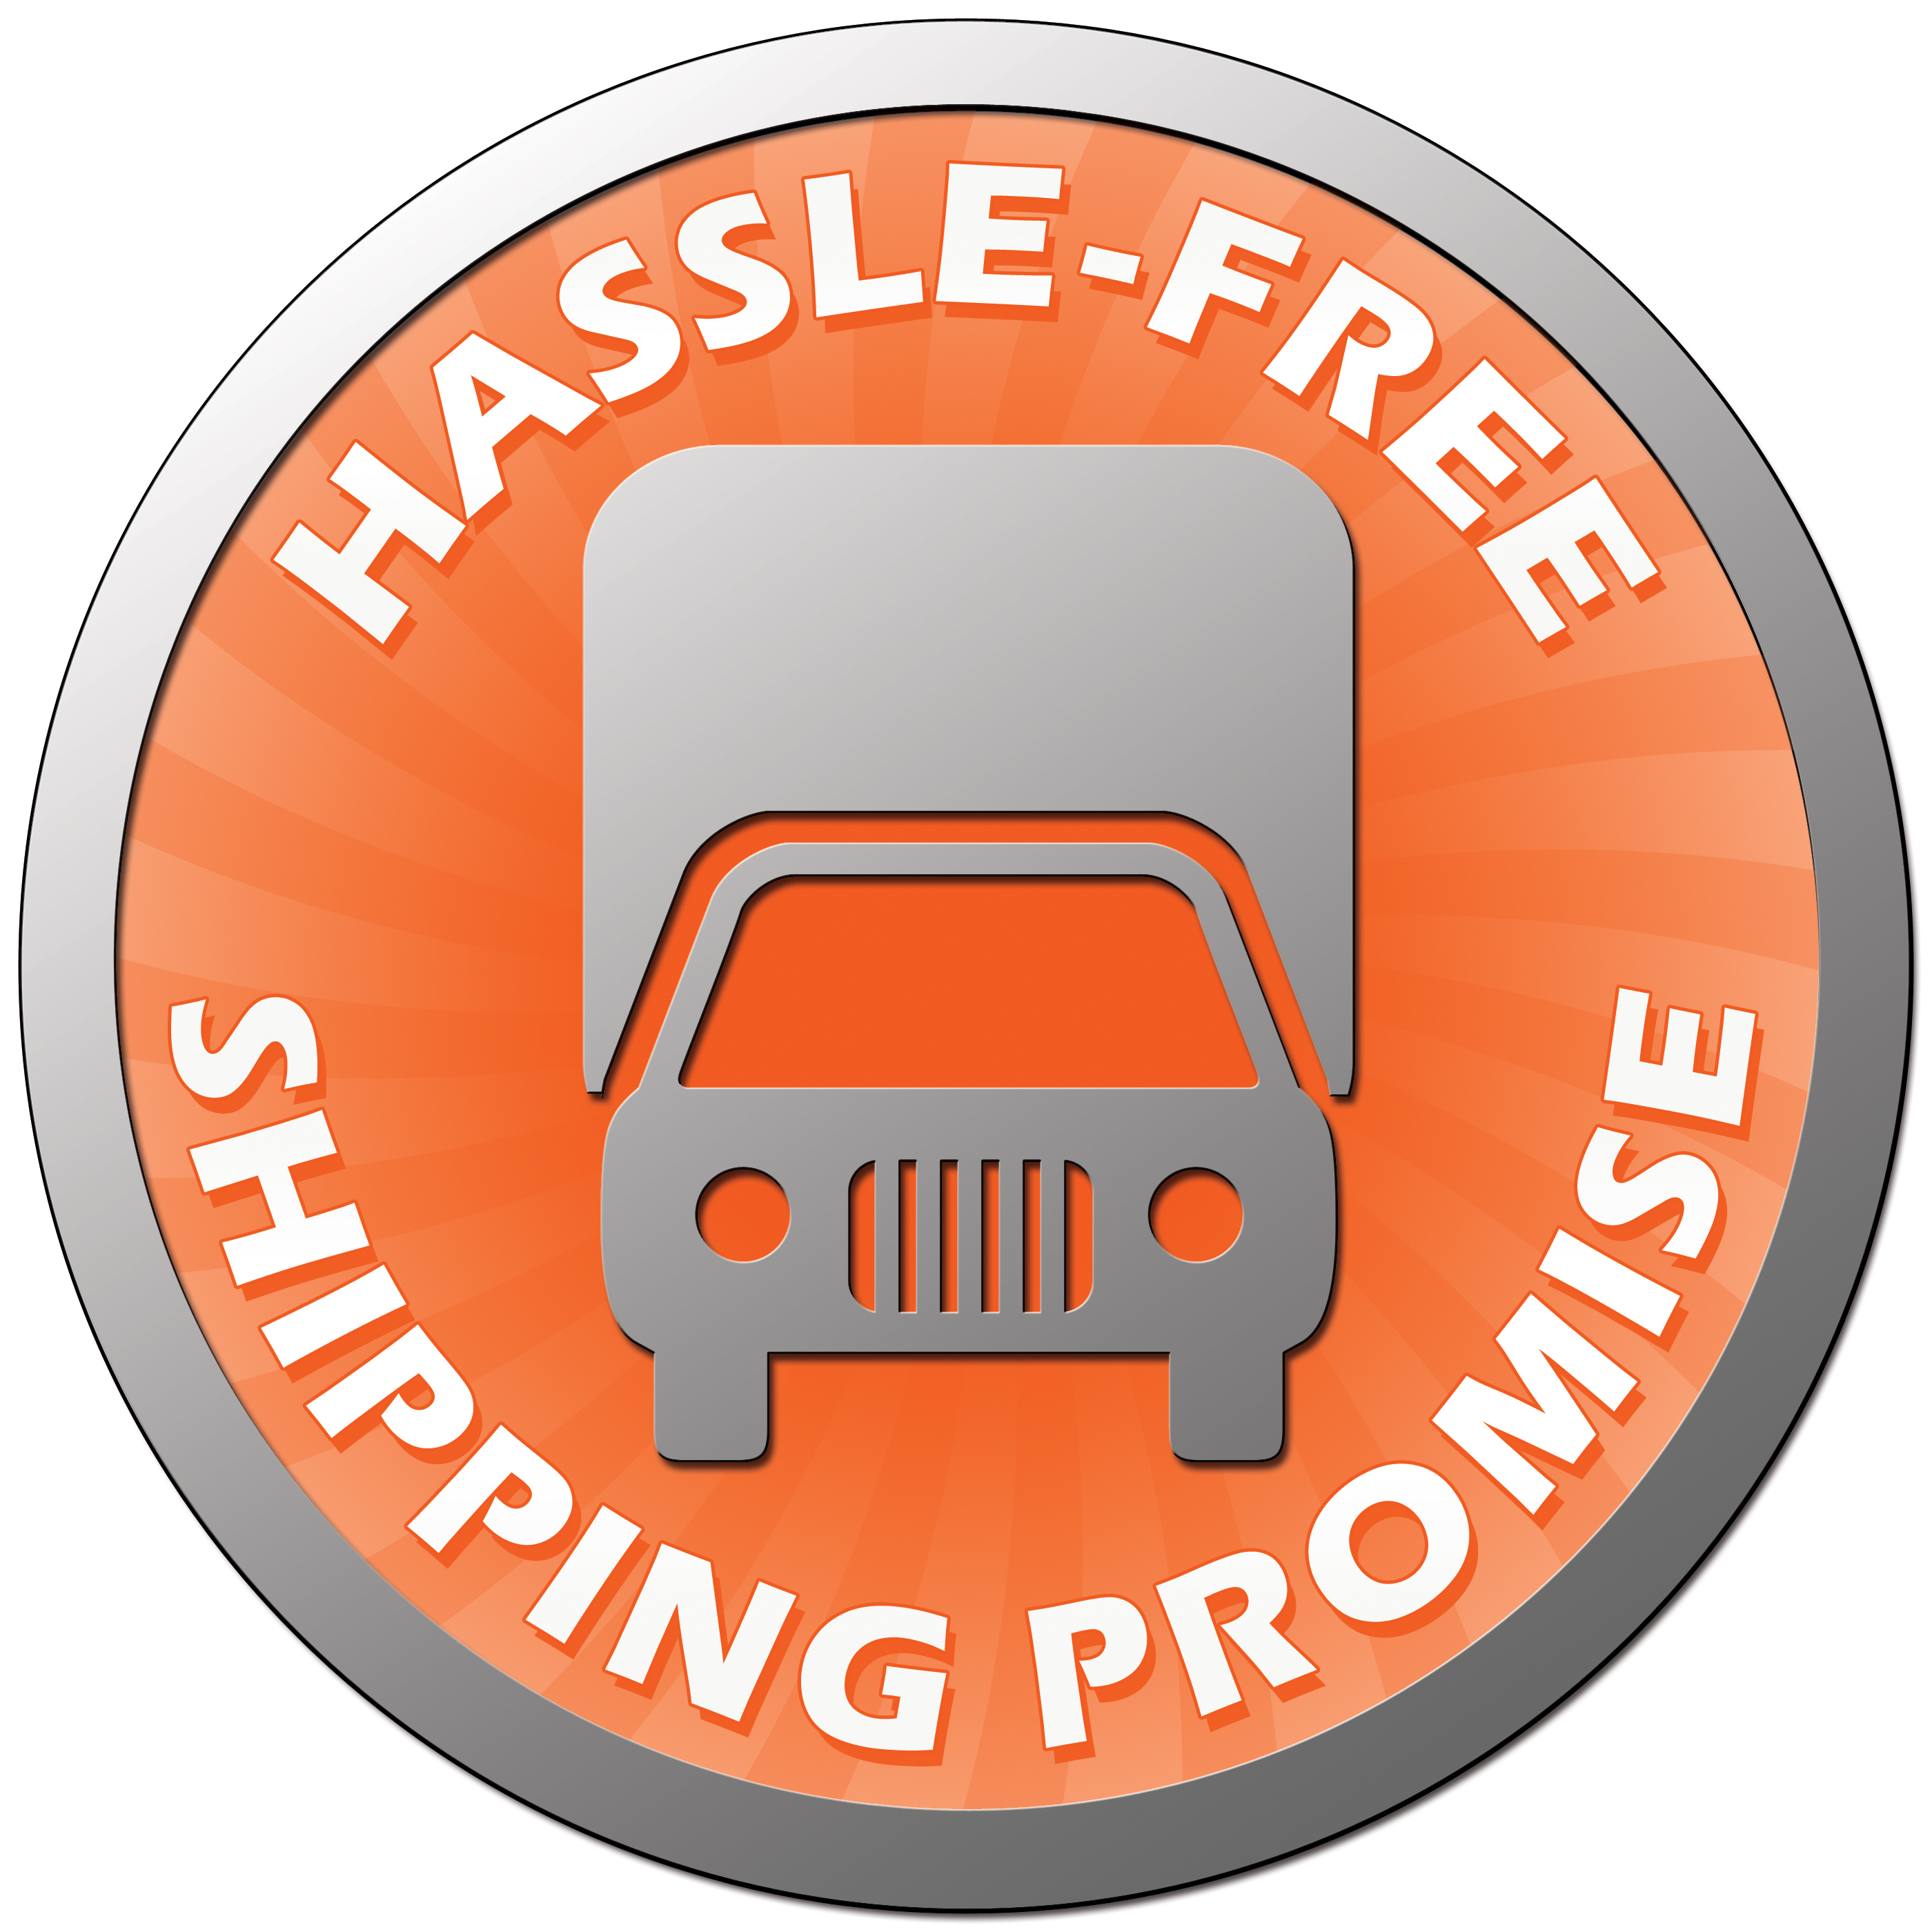 Oly-Ola Edgings Hassle-Free Shipping Promise